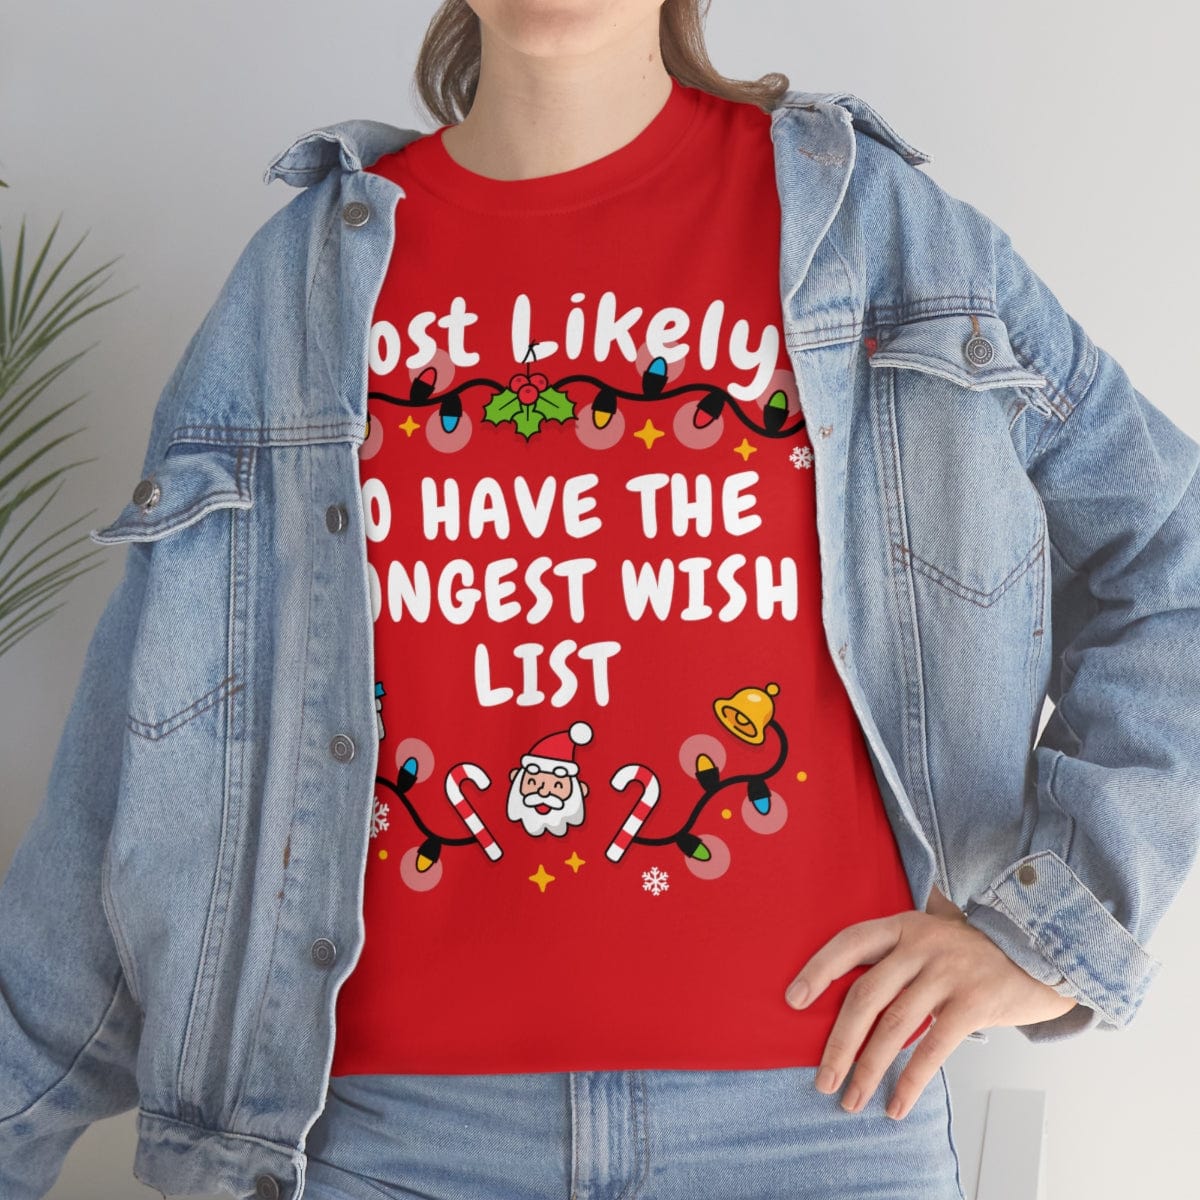 TO HAVE THE LONGEST WISH LIST